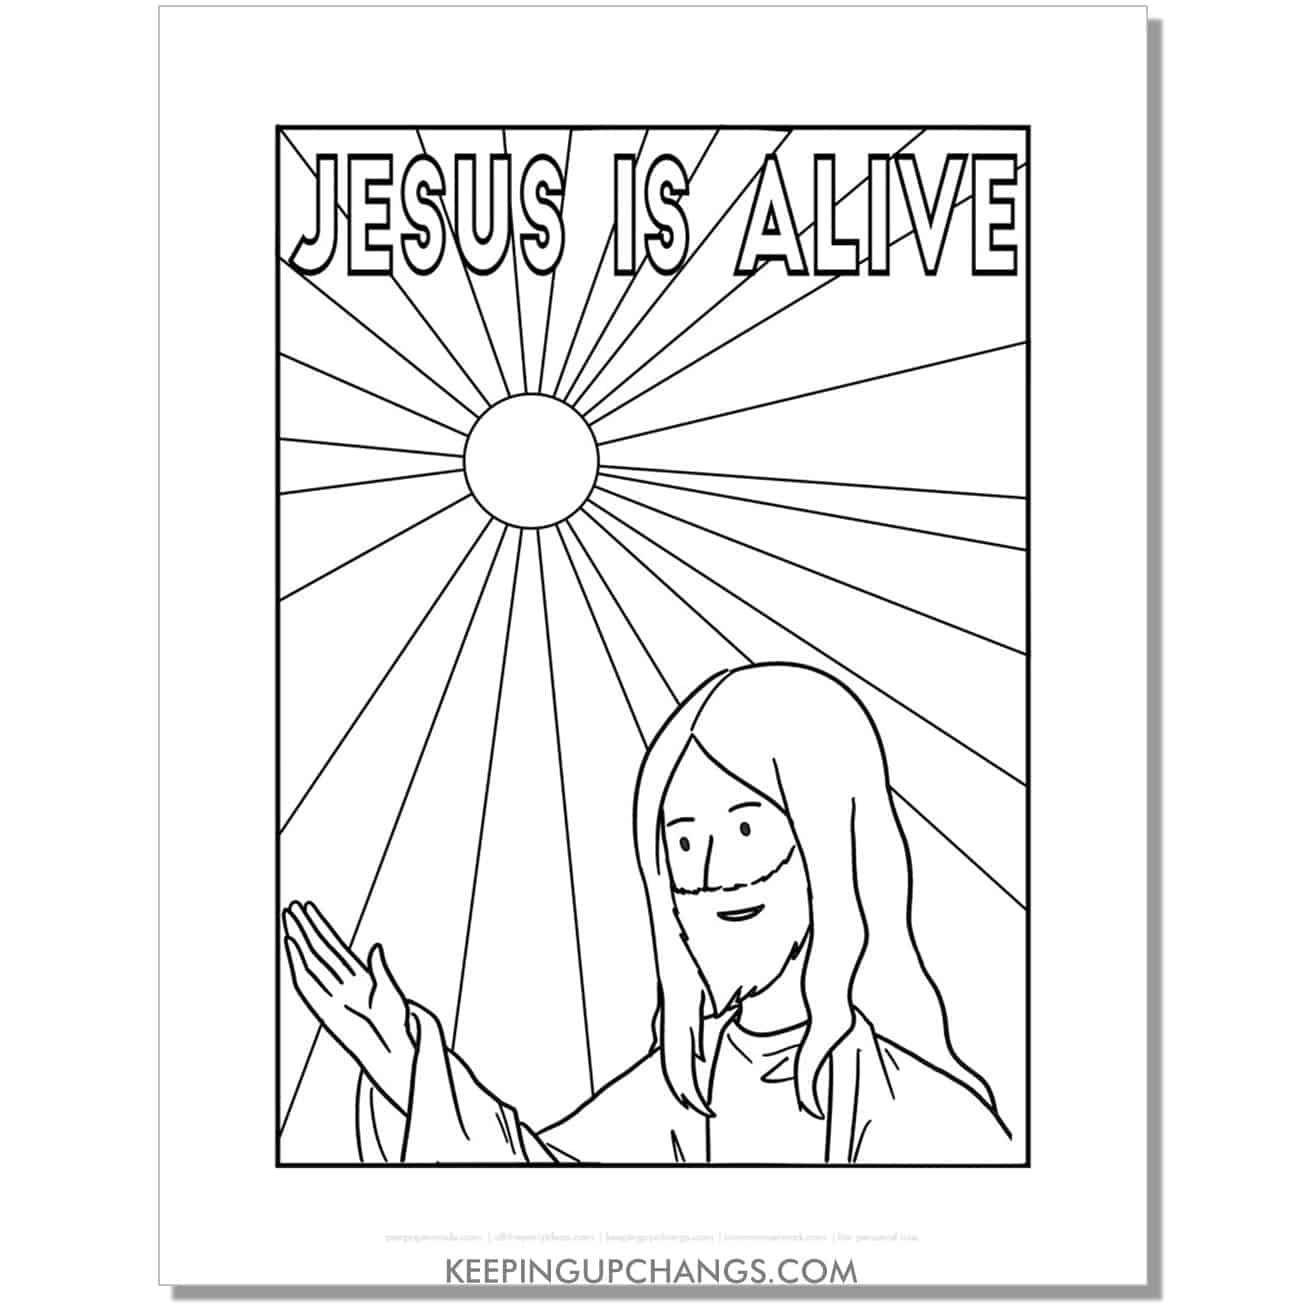 jesus is alive with sun shining light religious easter coloring page, sheet